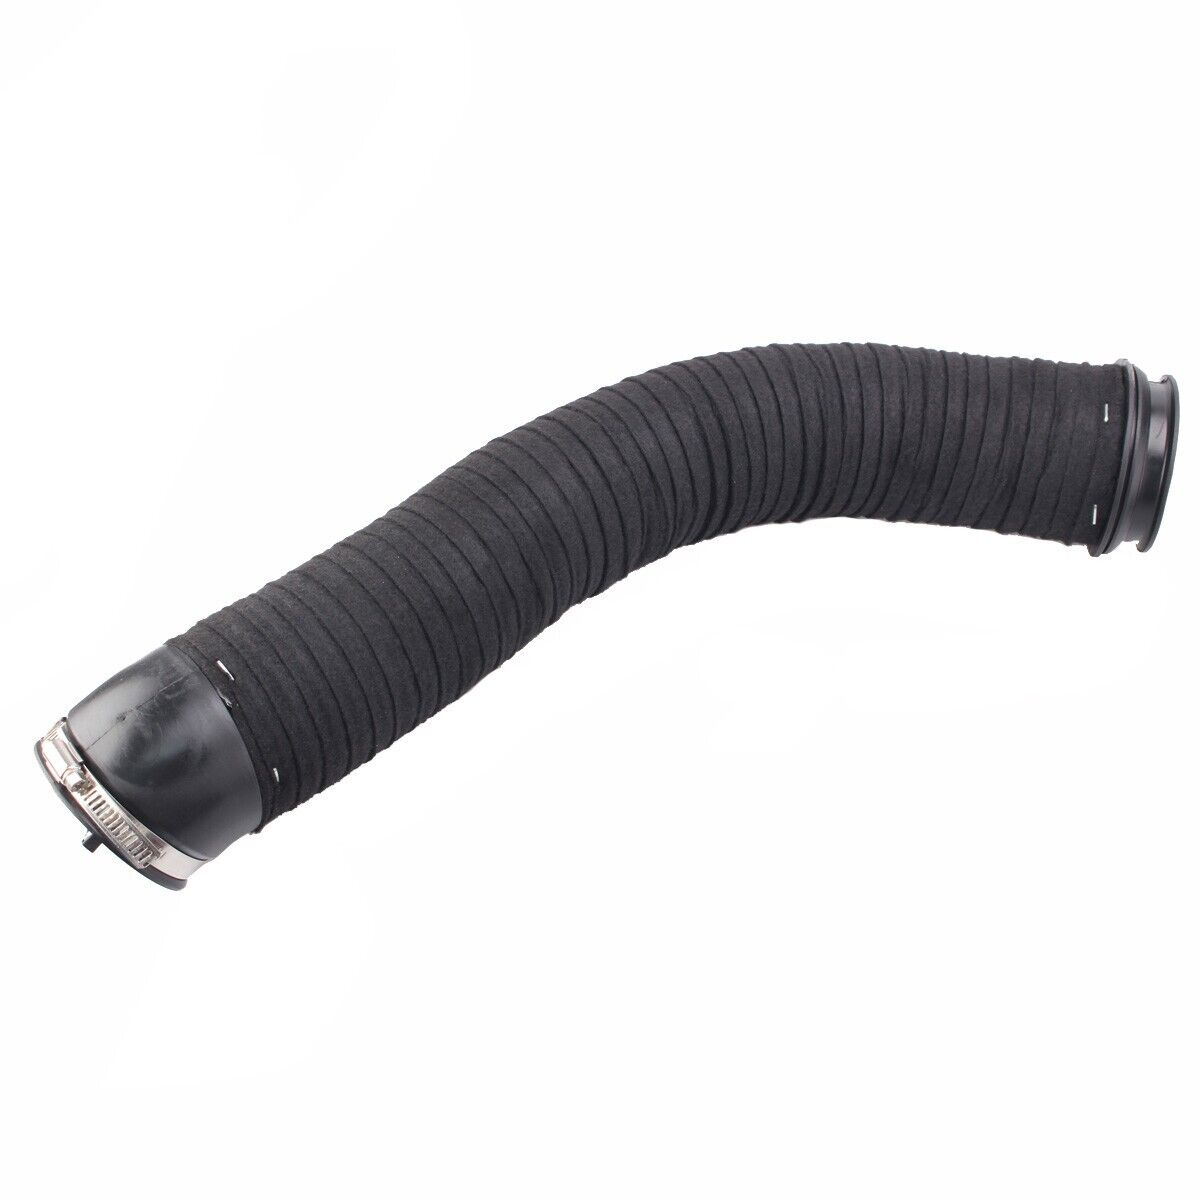 Air Cleaner Intake-Intake Duct Tube Hose for Chevrolet HHR 2.2L 2.4L 15865168 